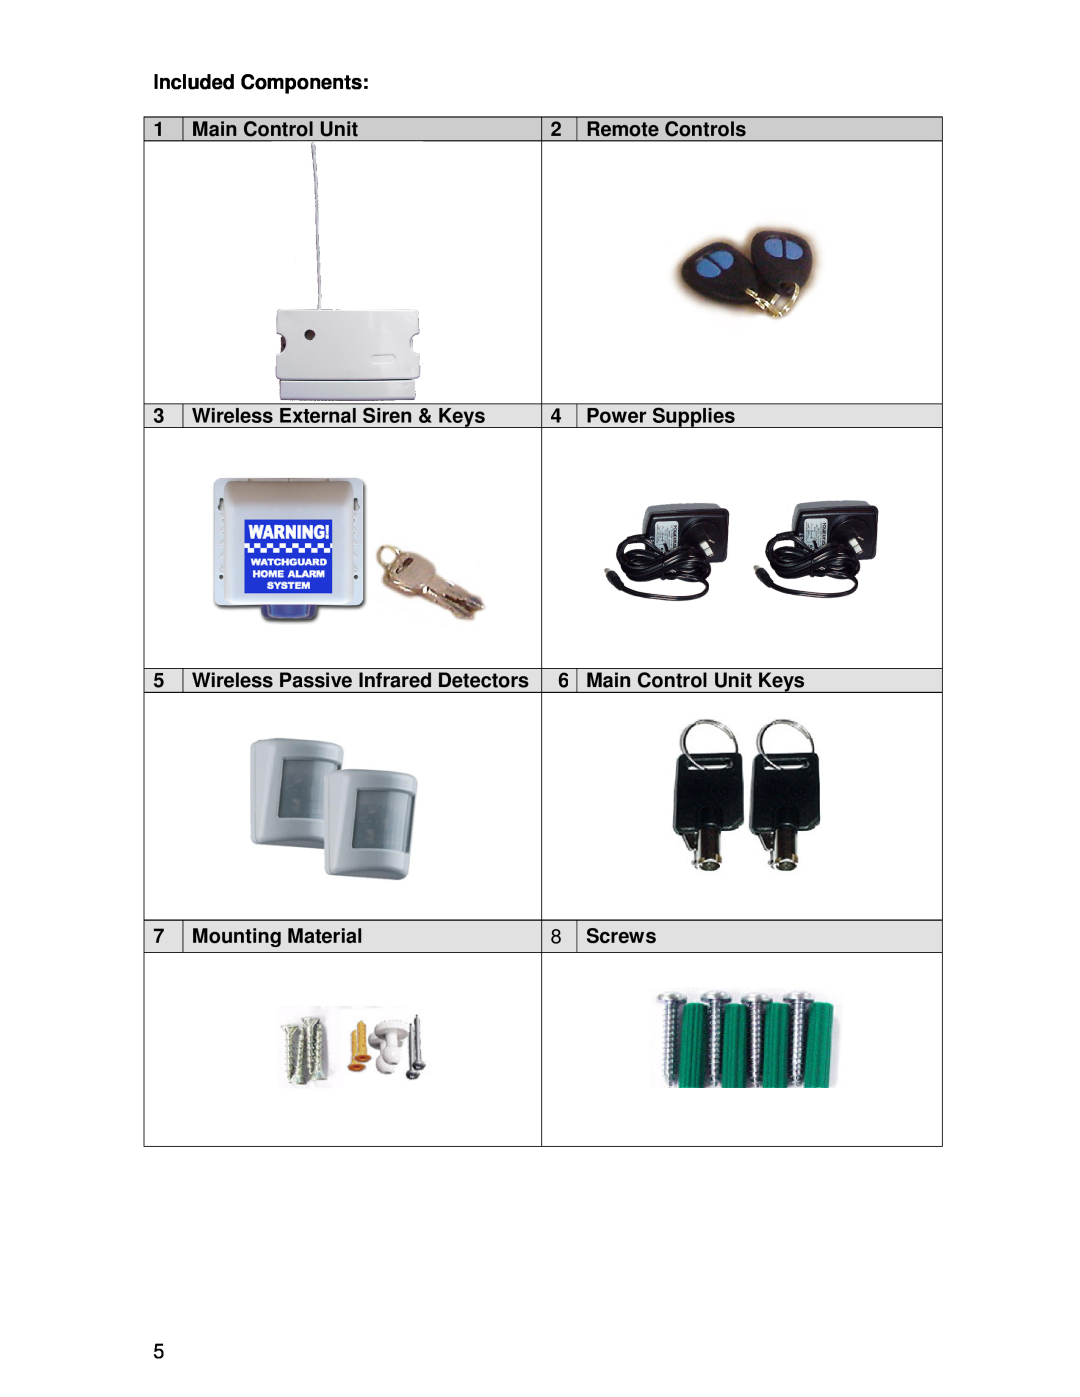 Ironman Fitness V2 Included Components, Main Control Unit, Remote Controls, Wireless External Siren & Keys, Power Supplies 